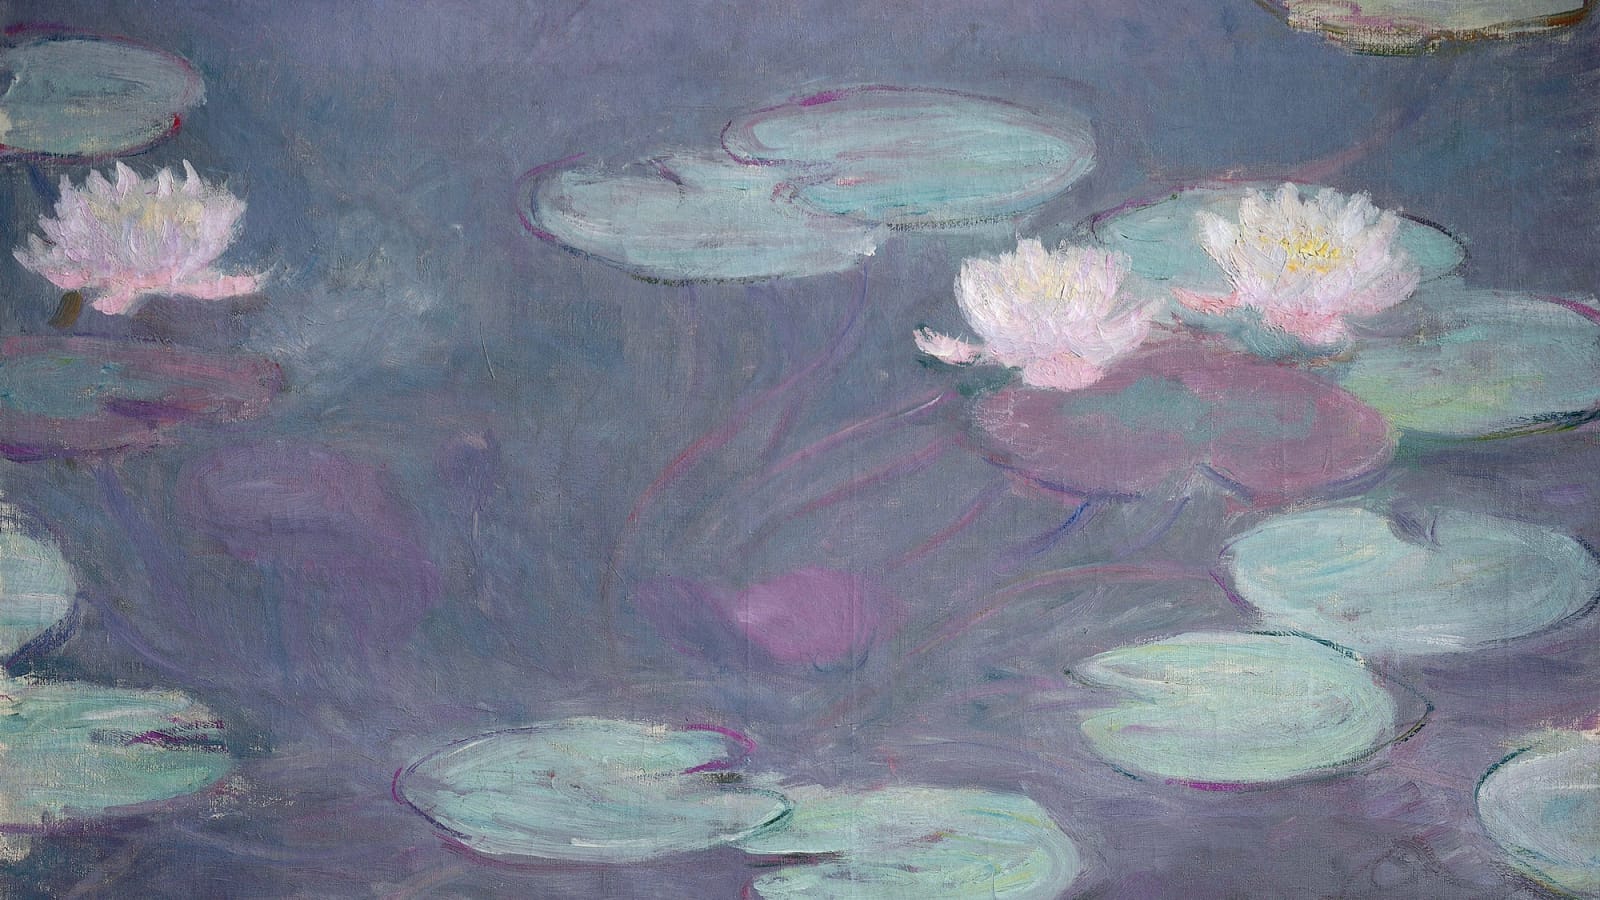 Claude Monet's Water Lily Paintings Almost Never Existed